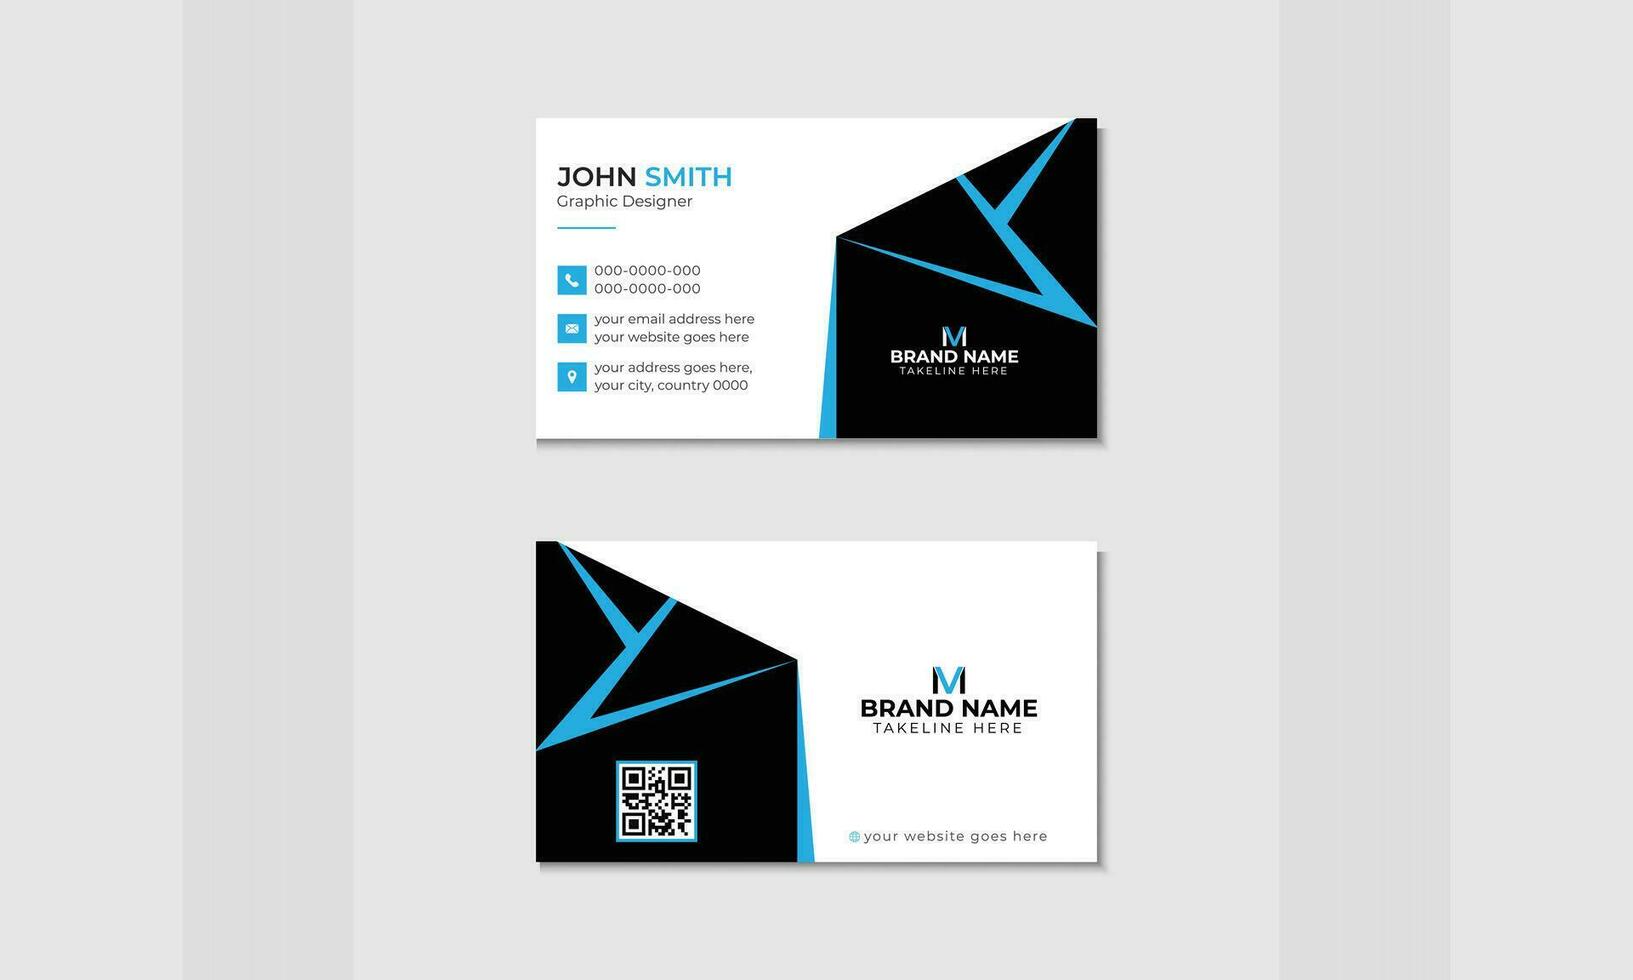 Design for a modern, simple business card with the organization's logo Visitor's card template in vector format for both professional and personal use.